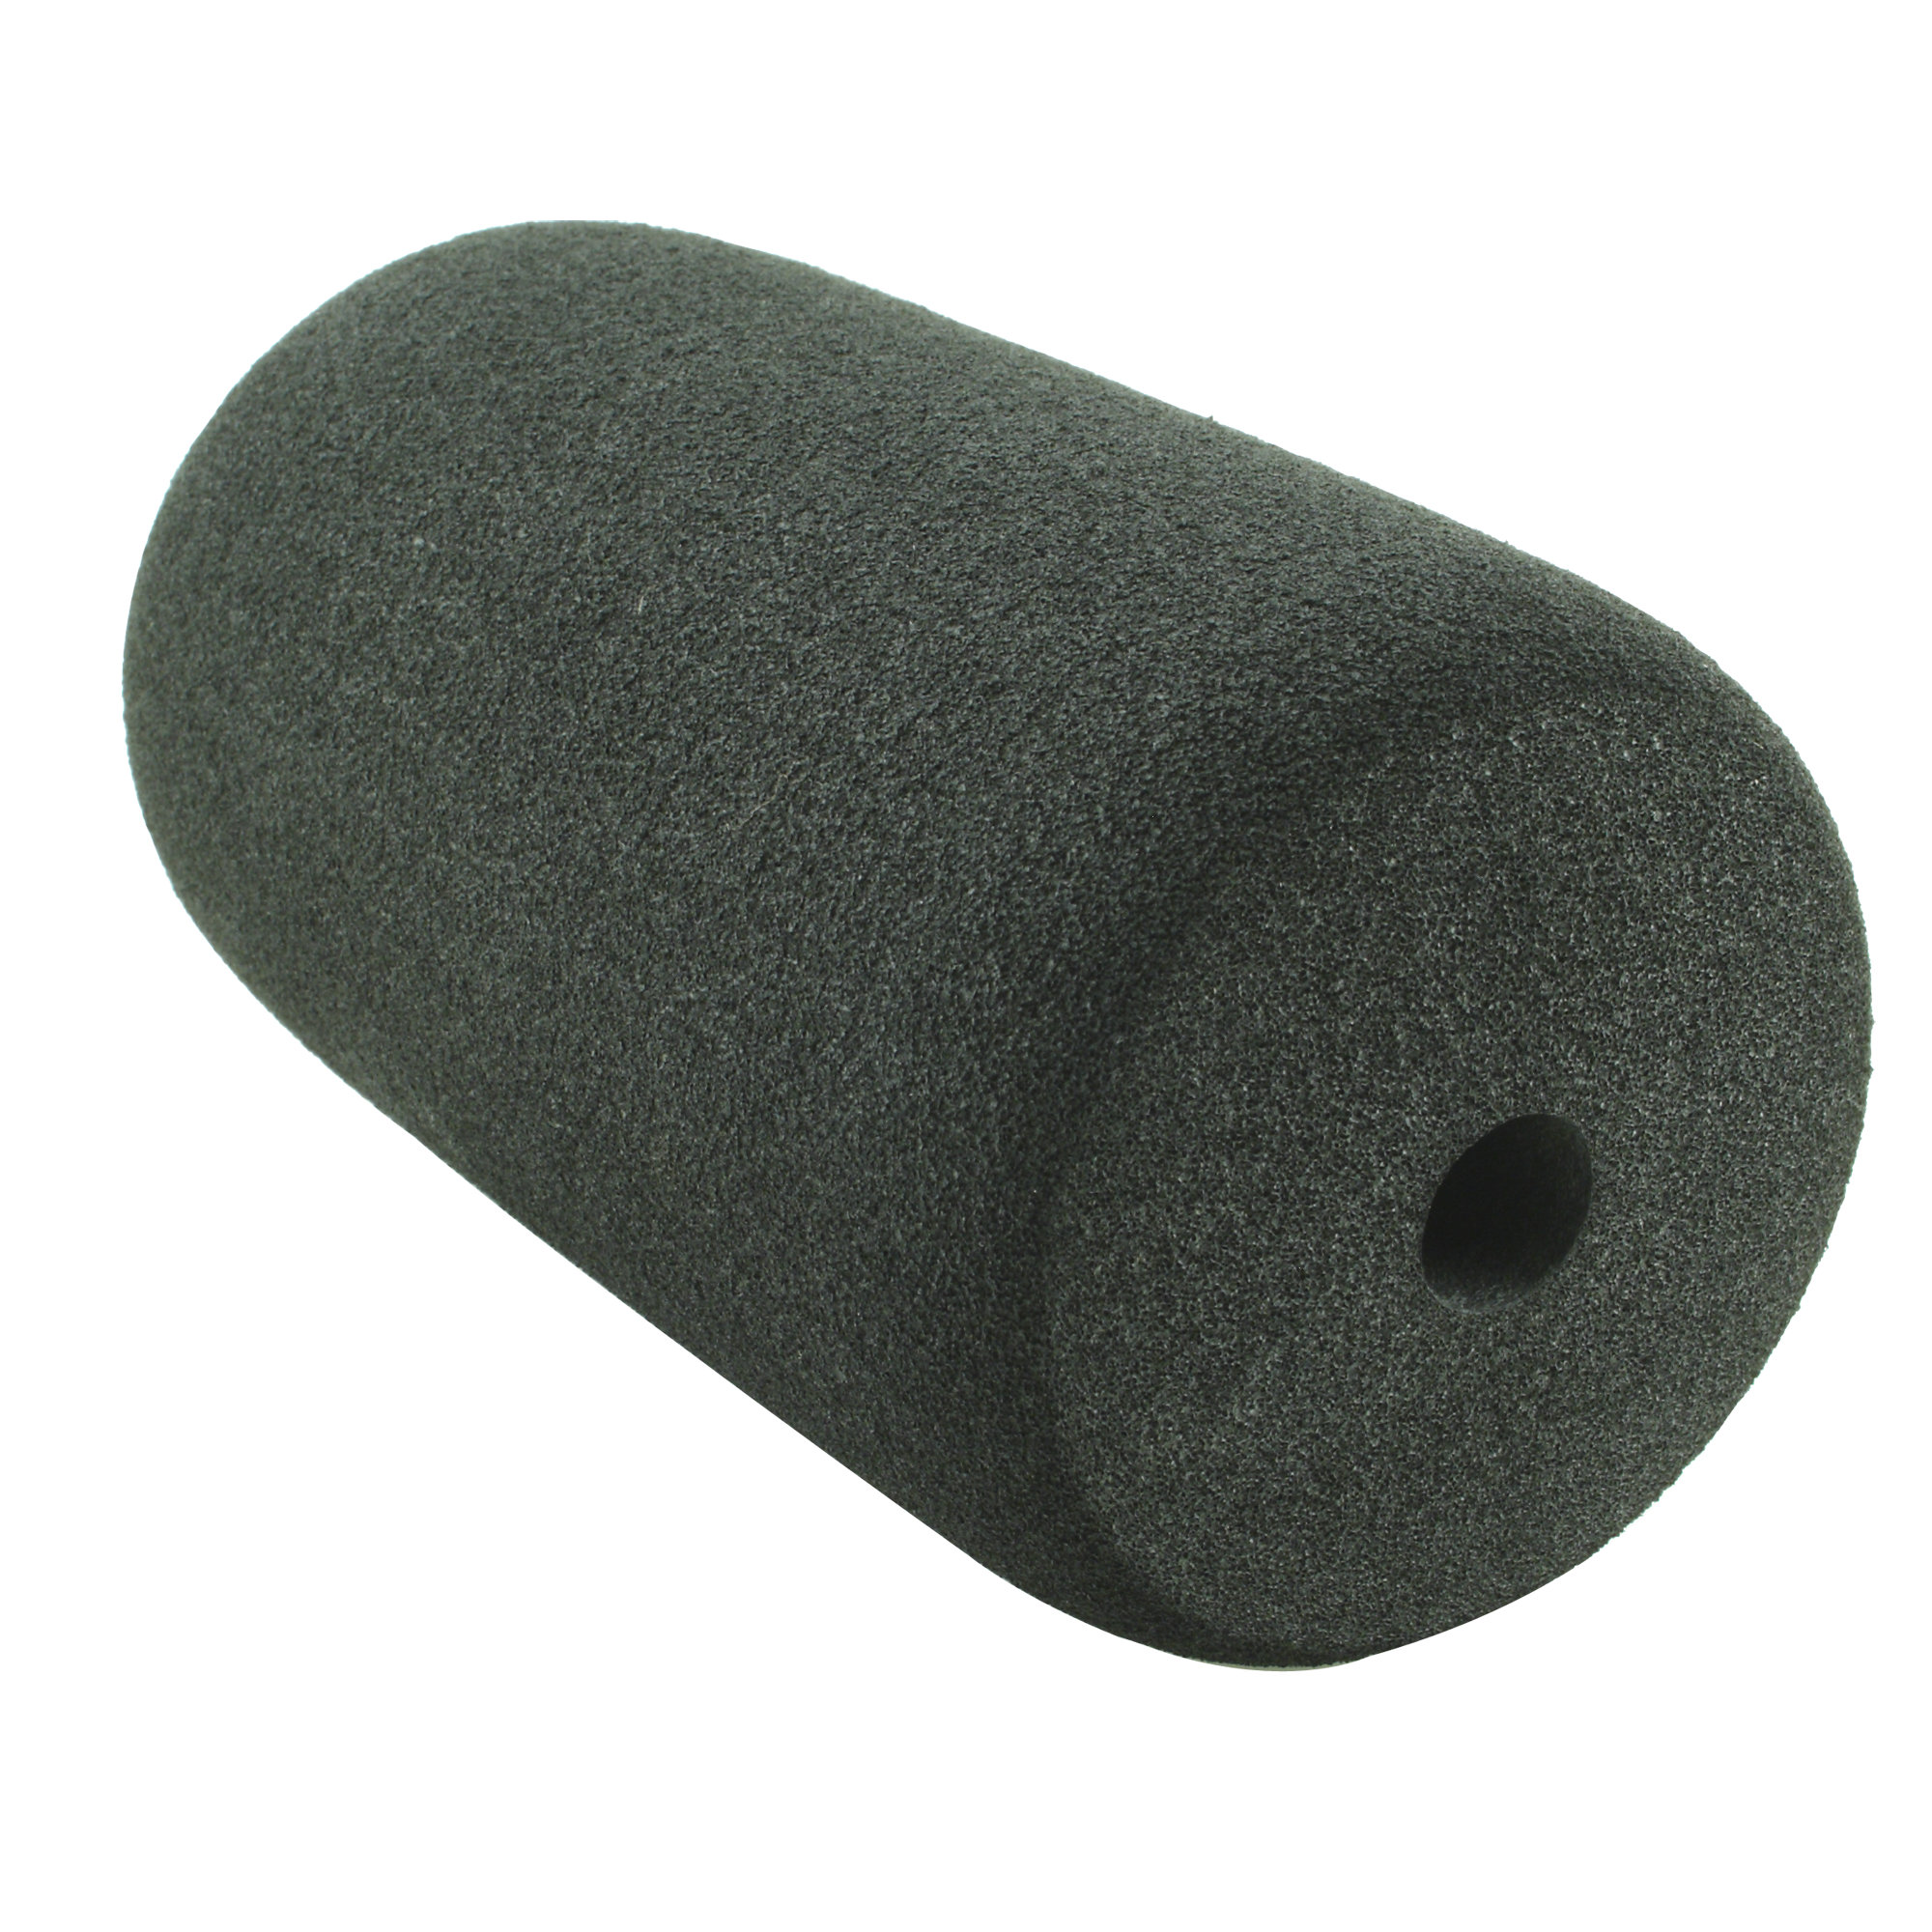 Foam Roller Pad for BowFlex Home Gyms